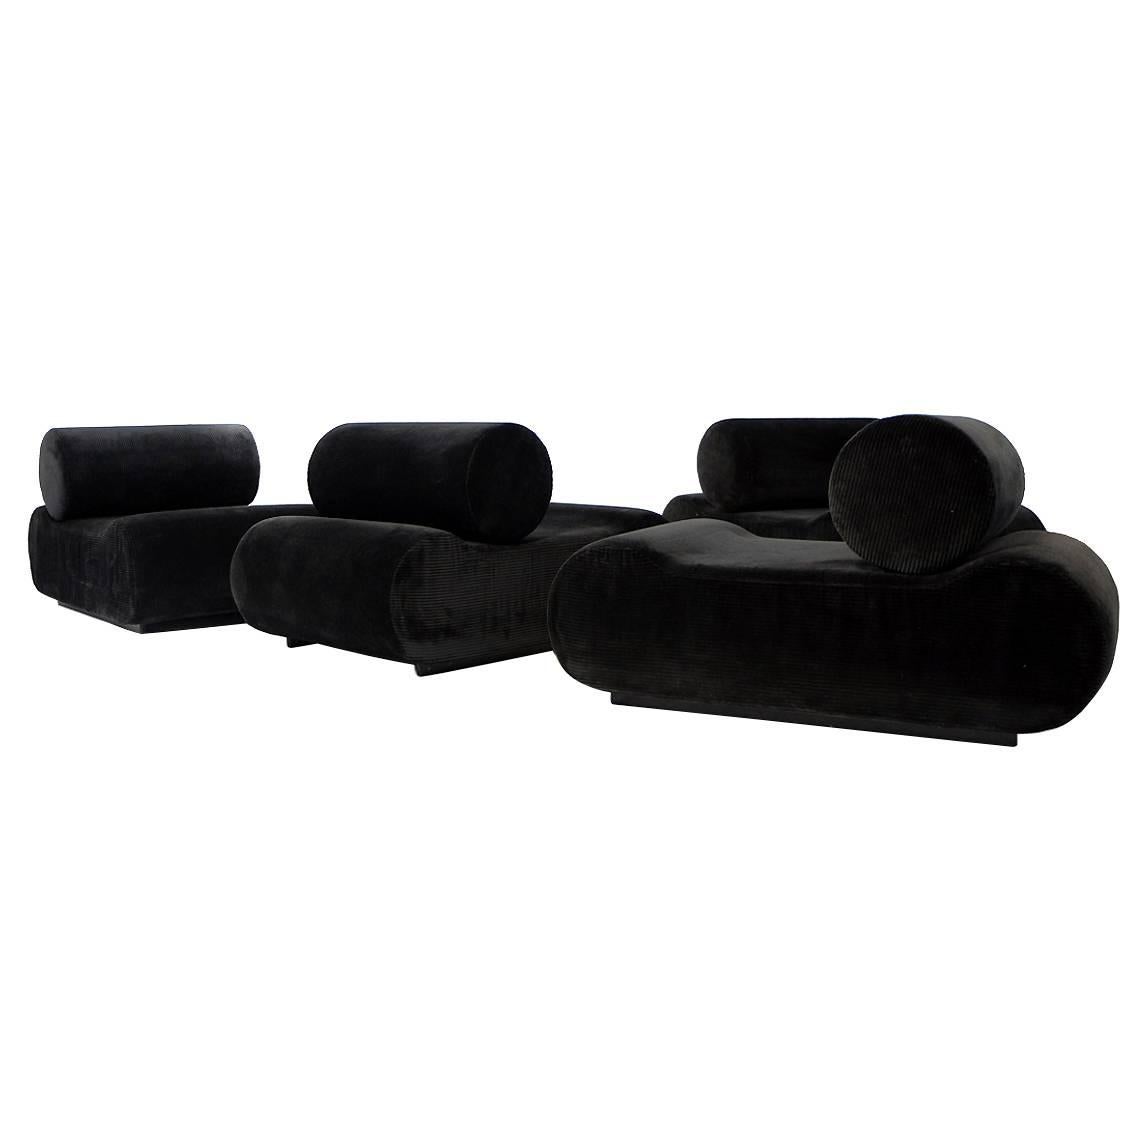 COR Modular Seating System Sofa Klaus Uredat for COR Germany 1974 black Daybed